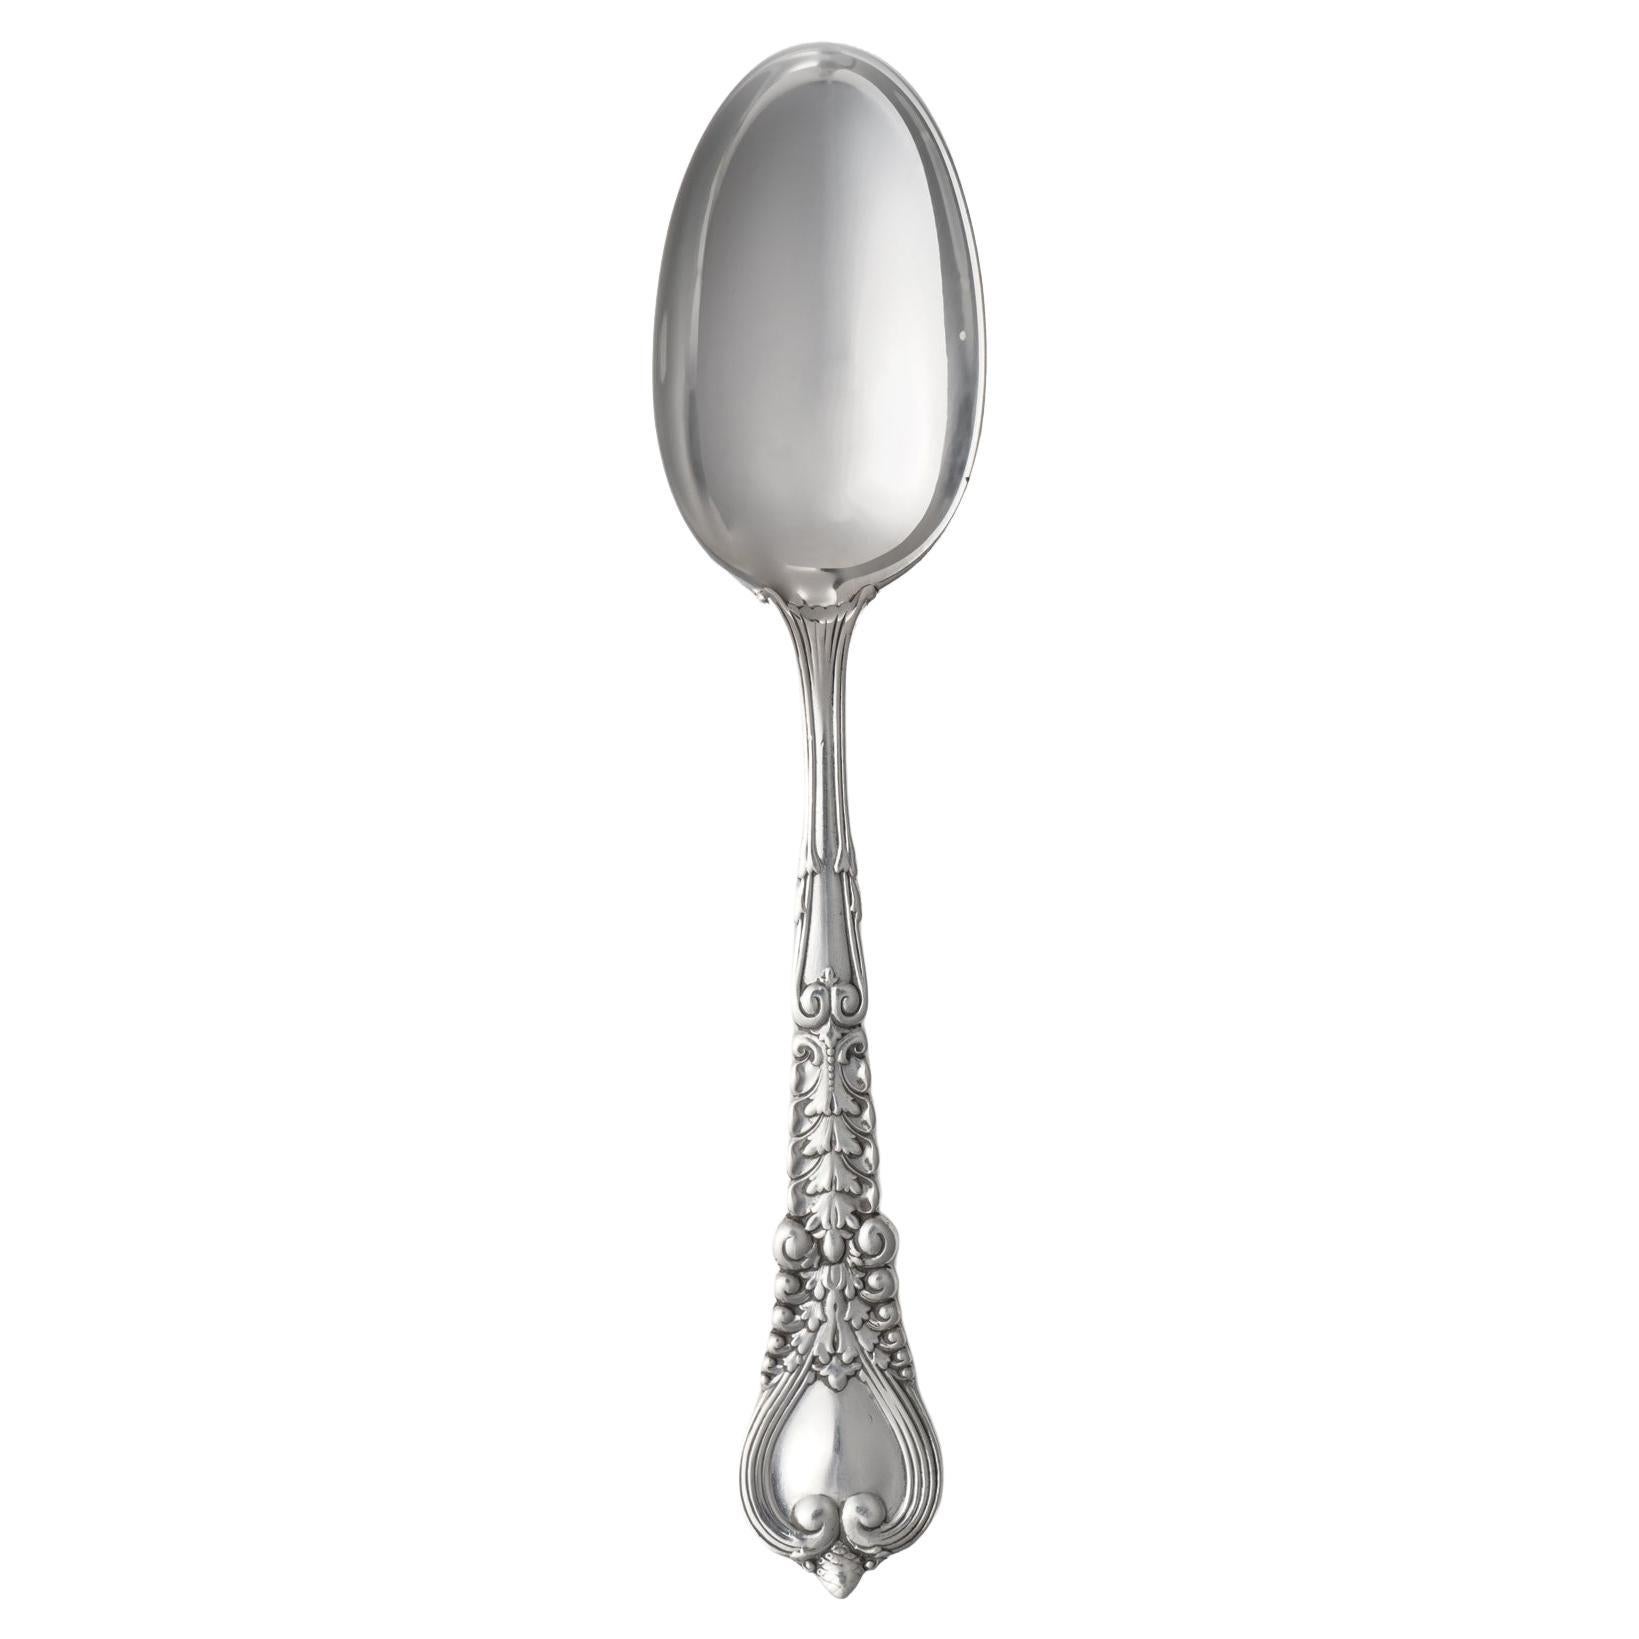 Antique Tiffany & Co. Sterling Silver Florentine Pattern Dessert Spoon For Sale